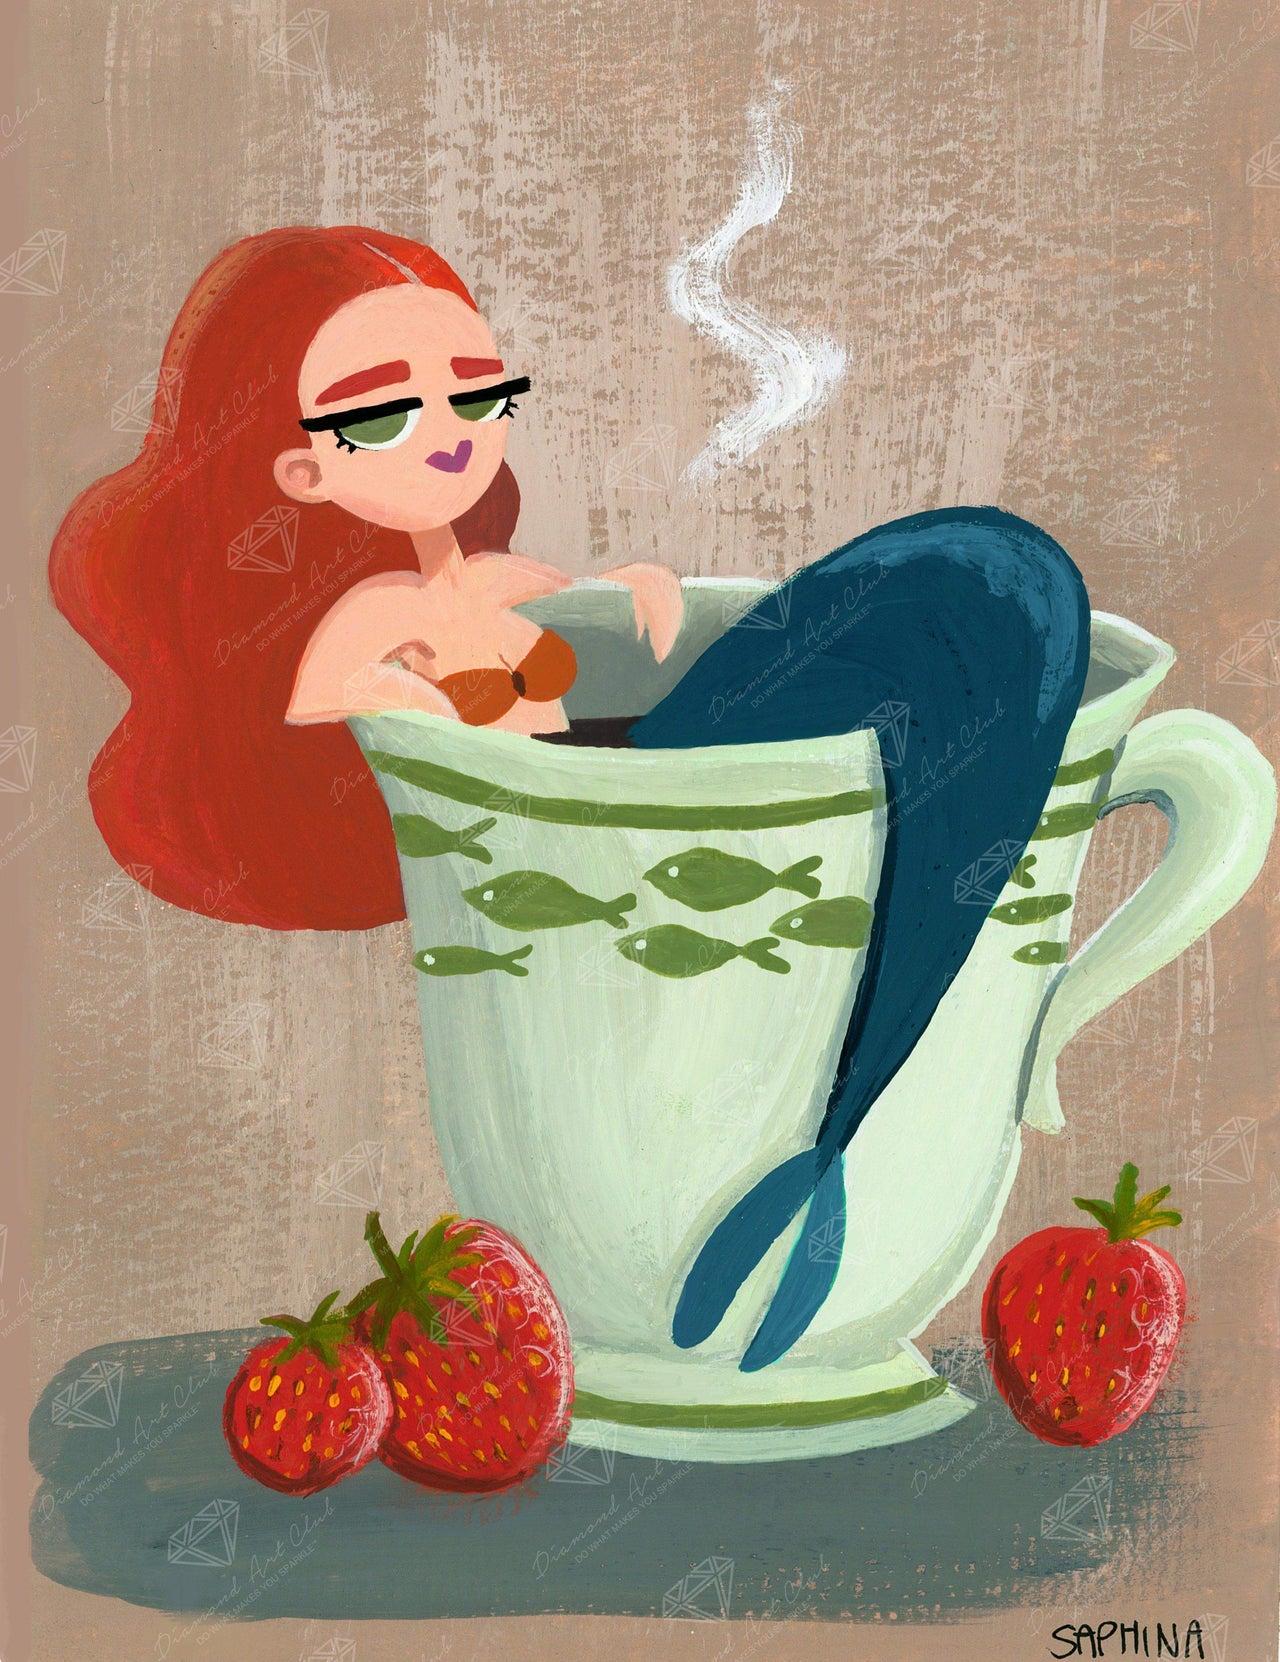 Diamond Painting Mermaid In A Cup 20" x 26″ (51cm x 66cm) / Round with 32 Colors including 3 ABs / 42,535